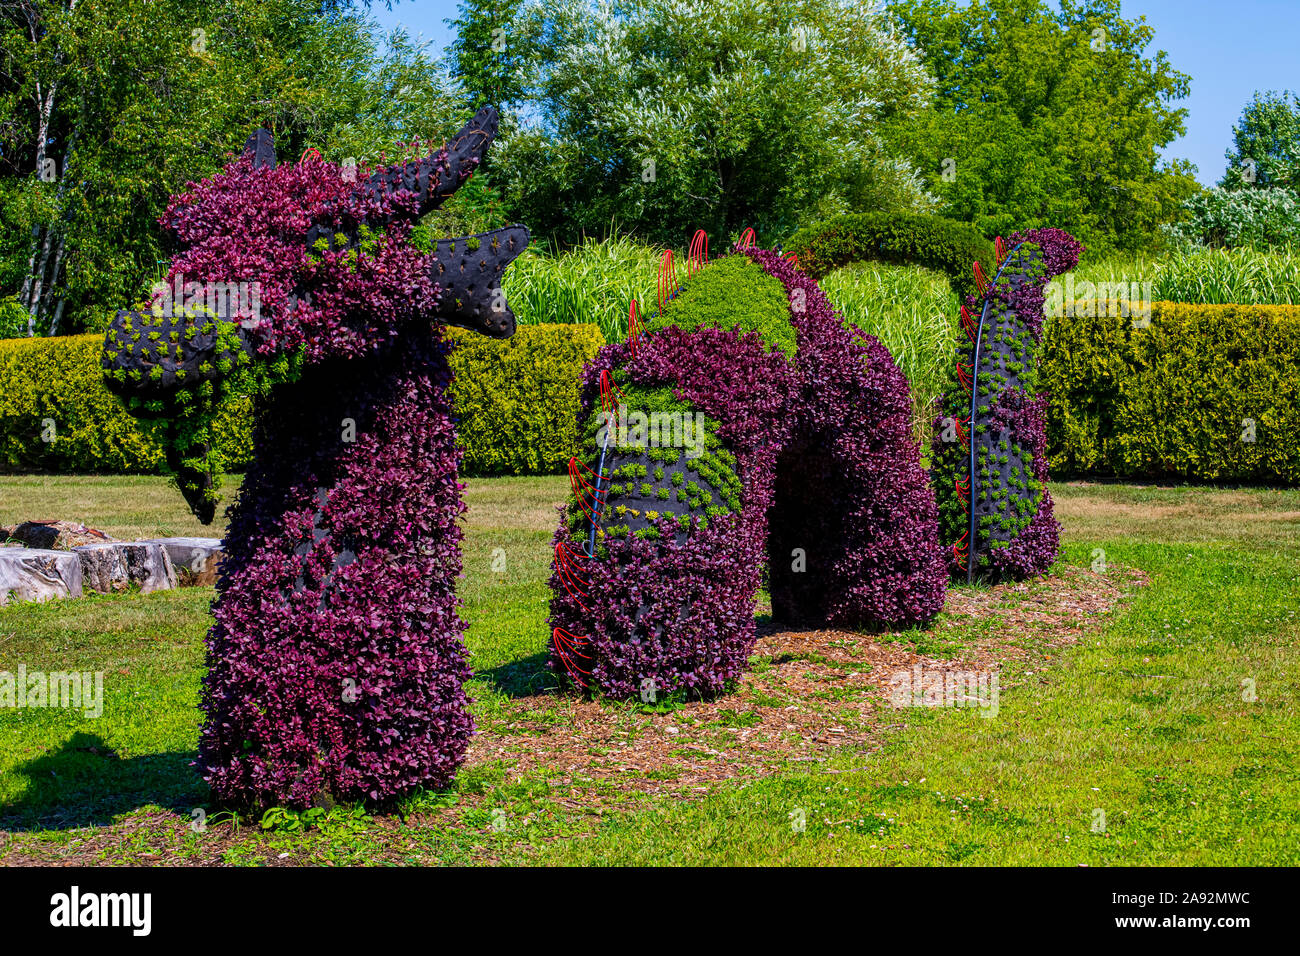 Plants with purple and green foliage created in the shape of a dragon or sea monster; St Lazare, Quebec, Canada Stock Photo